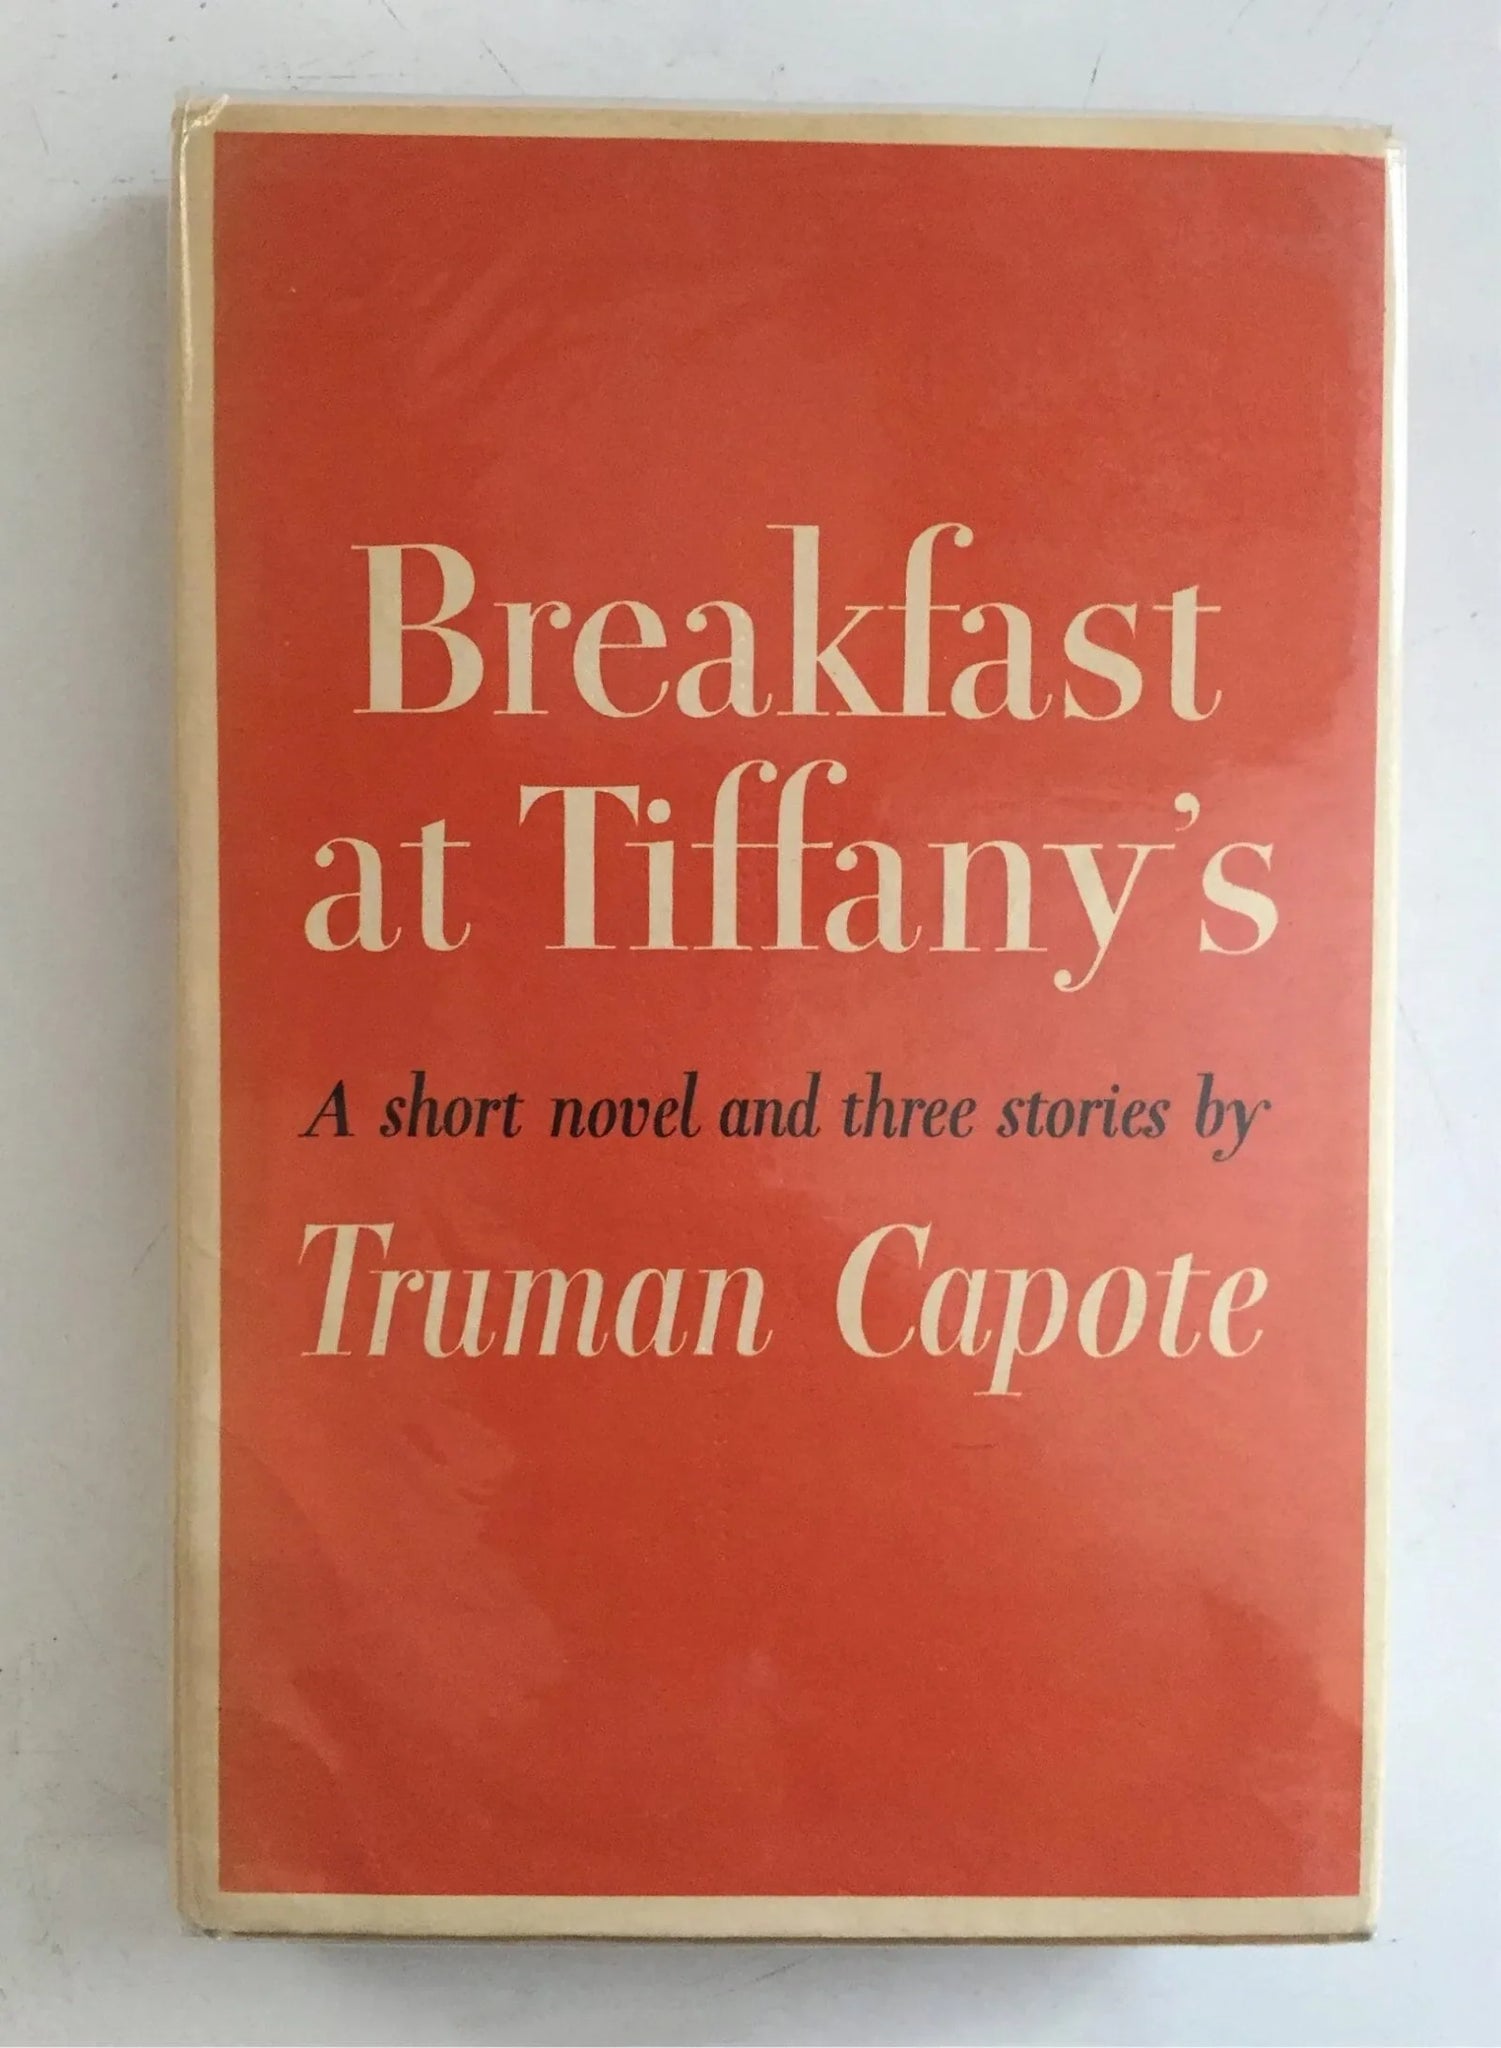 RARE FIND
A short novel and three stories by Truman Capote (1958). 
Vintage first edition hardcover book